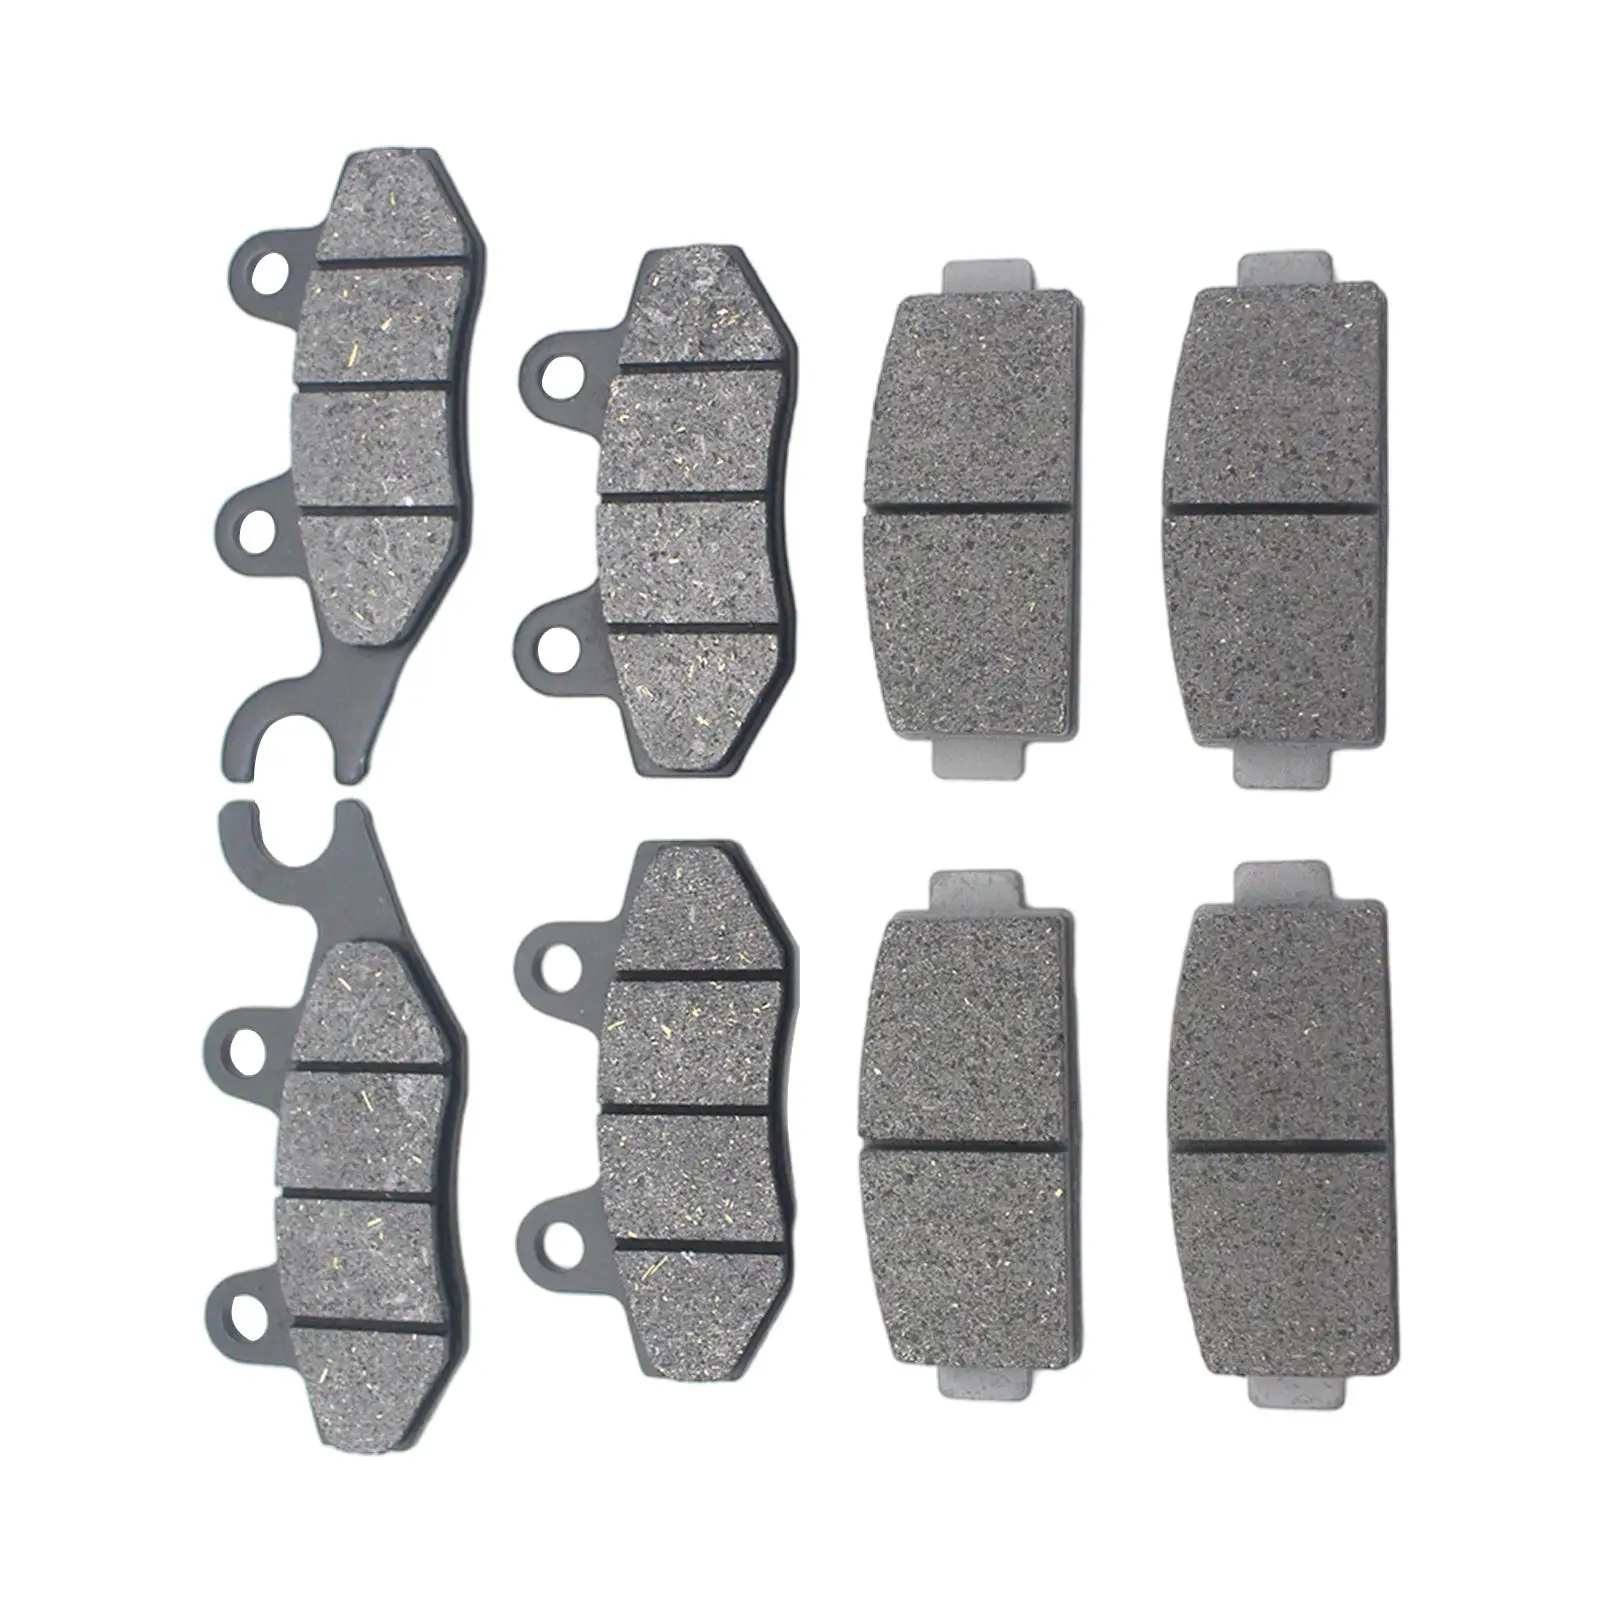 Motorcycle Brake Pads Replacement Automotive Front Rear for 